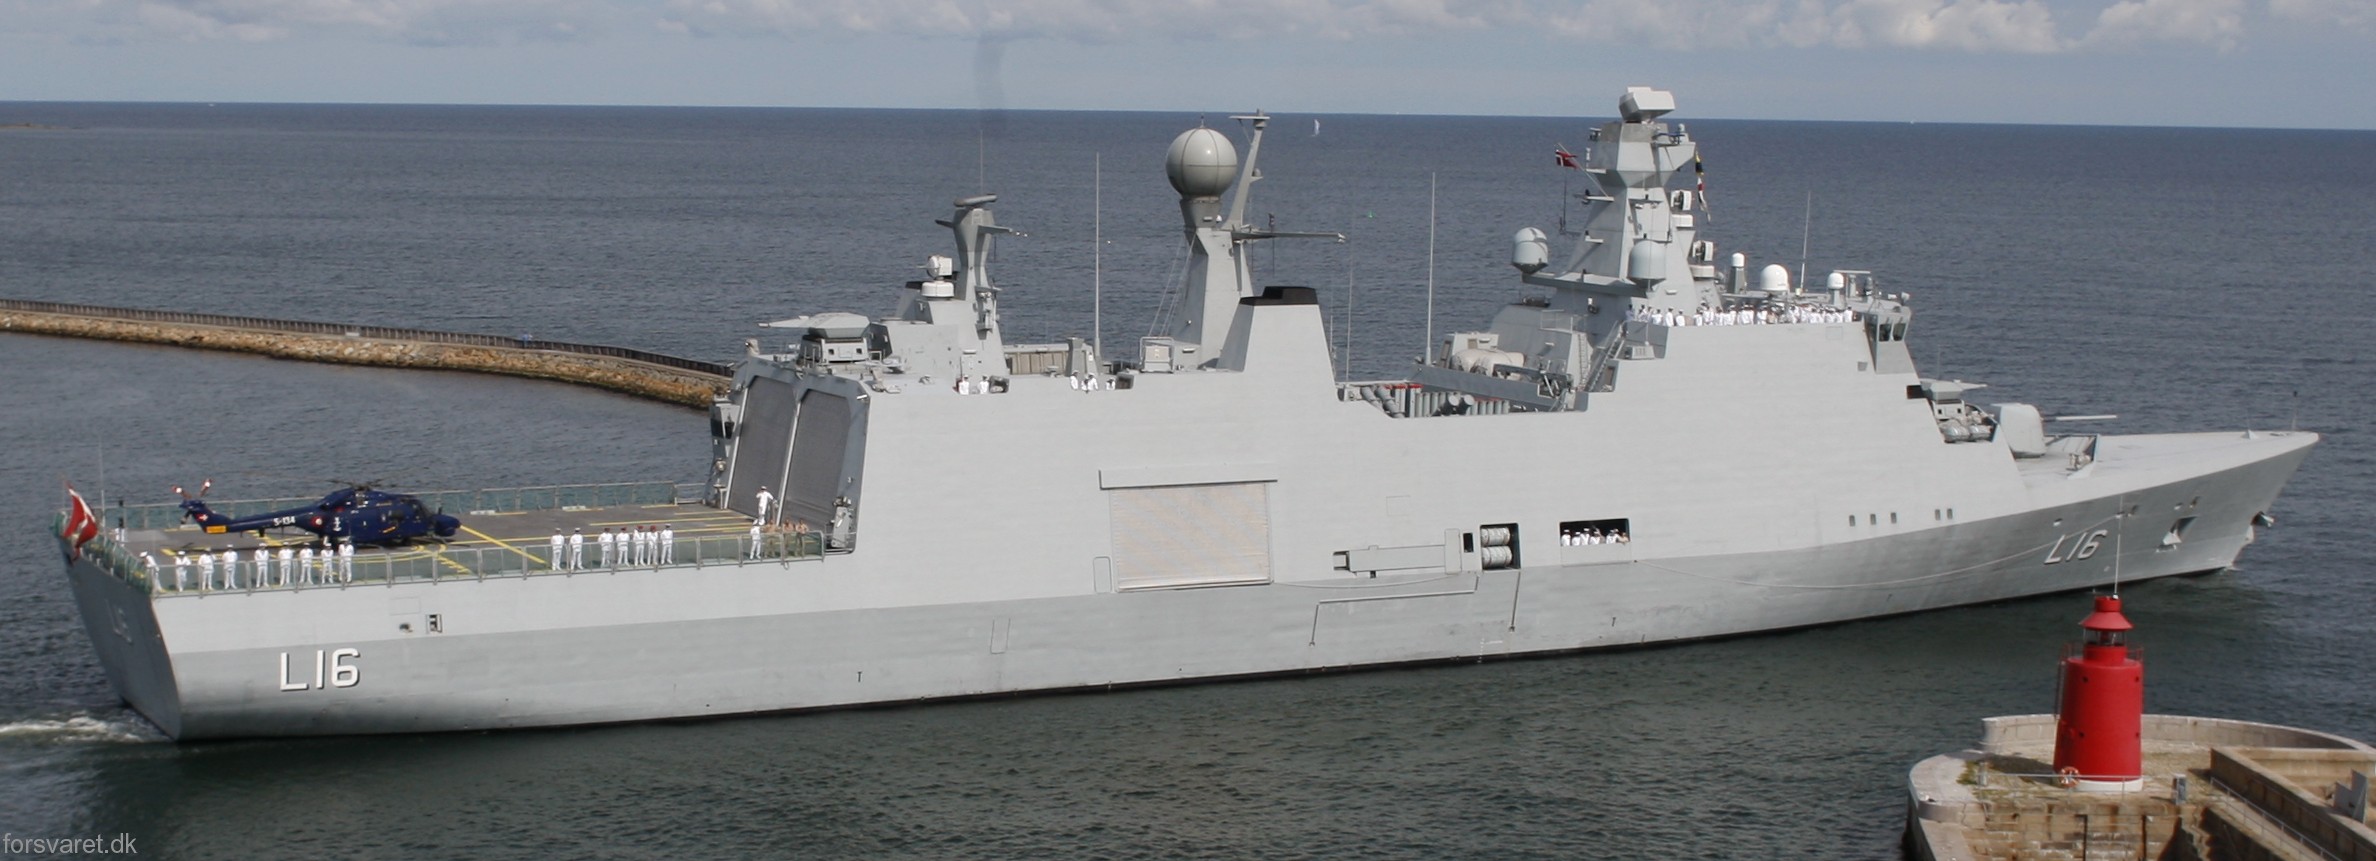 l-16 hdms absalon command support ship frigate royal danish navy 11